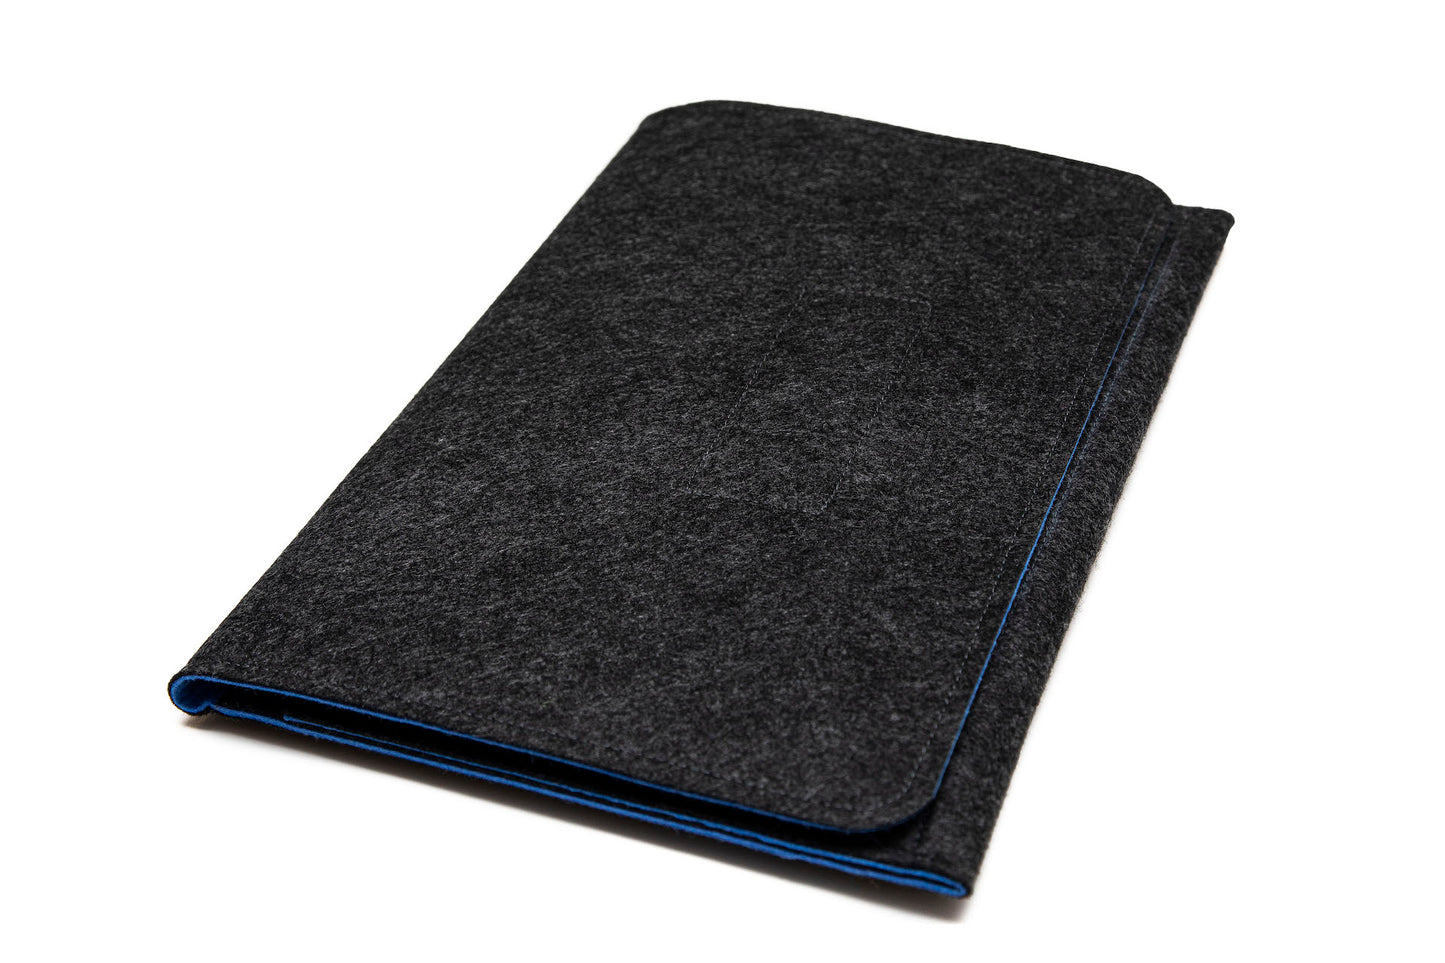 Handmade MacBook Cover with Accessories Pocket: Charcoal & Blue